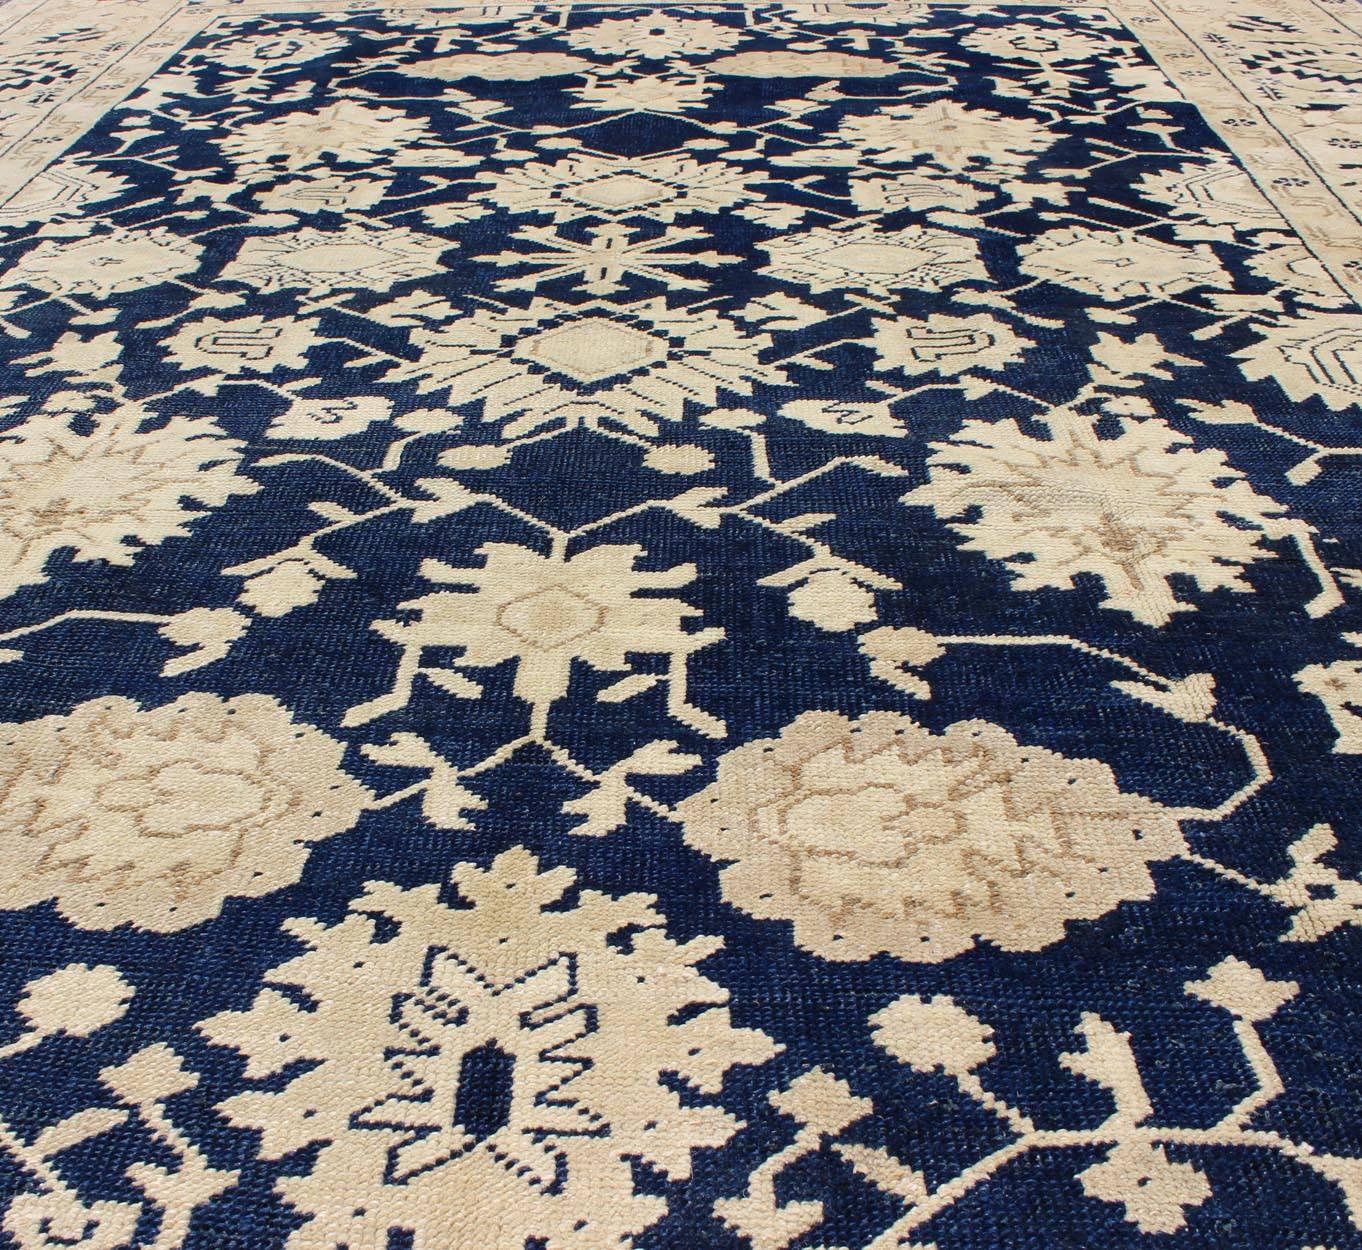 20th Century Unique Turkish Oushak Rug with Floral Design in Dark Blue, Cream and Light Brown For Sale